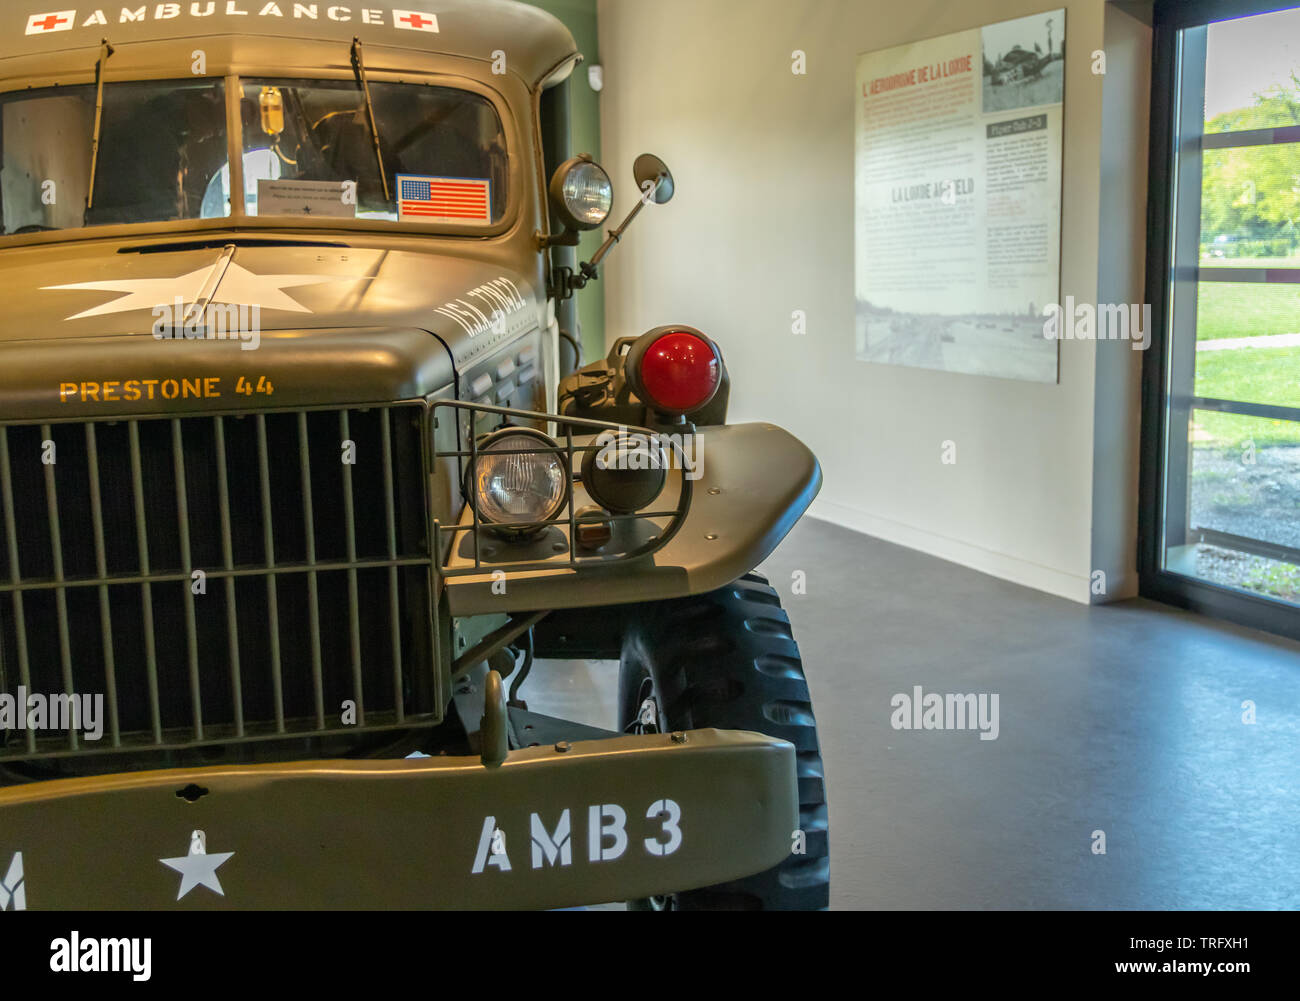 Sainte Mere Eglise, France - May 5, 2019: Dodge WC54 military ambulance truck in the airborne museum. Stock Photo